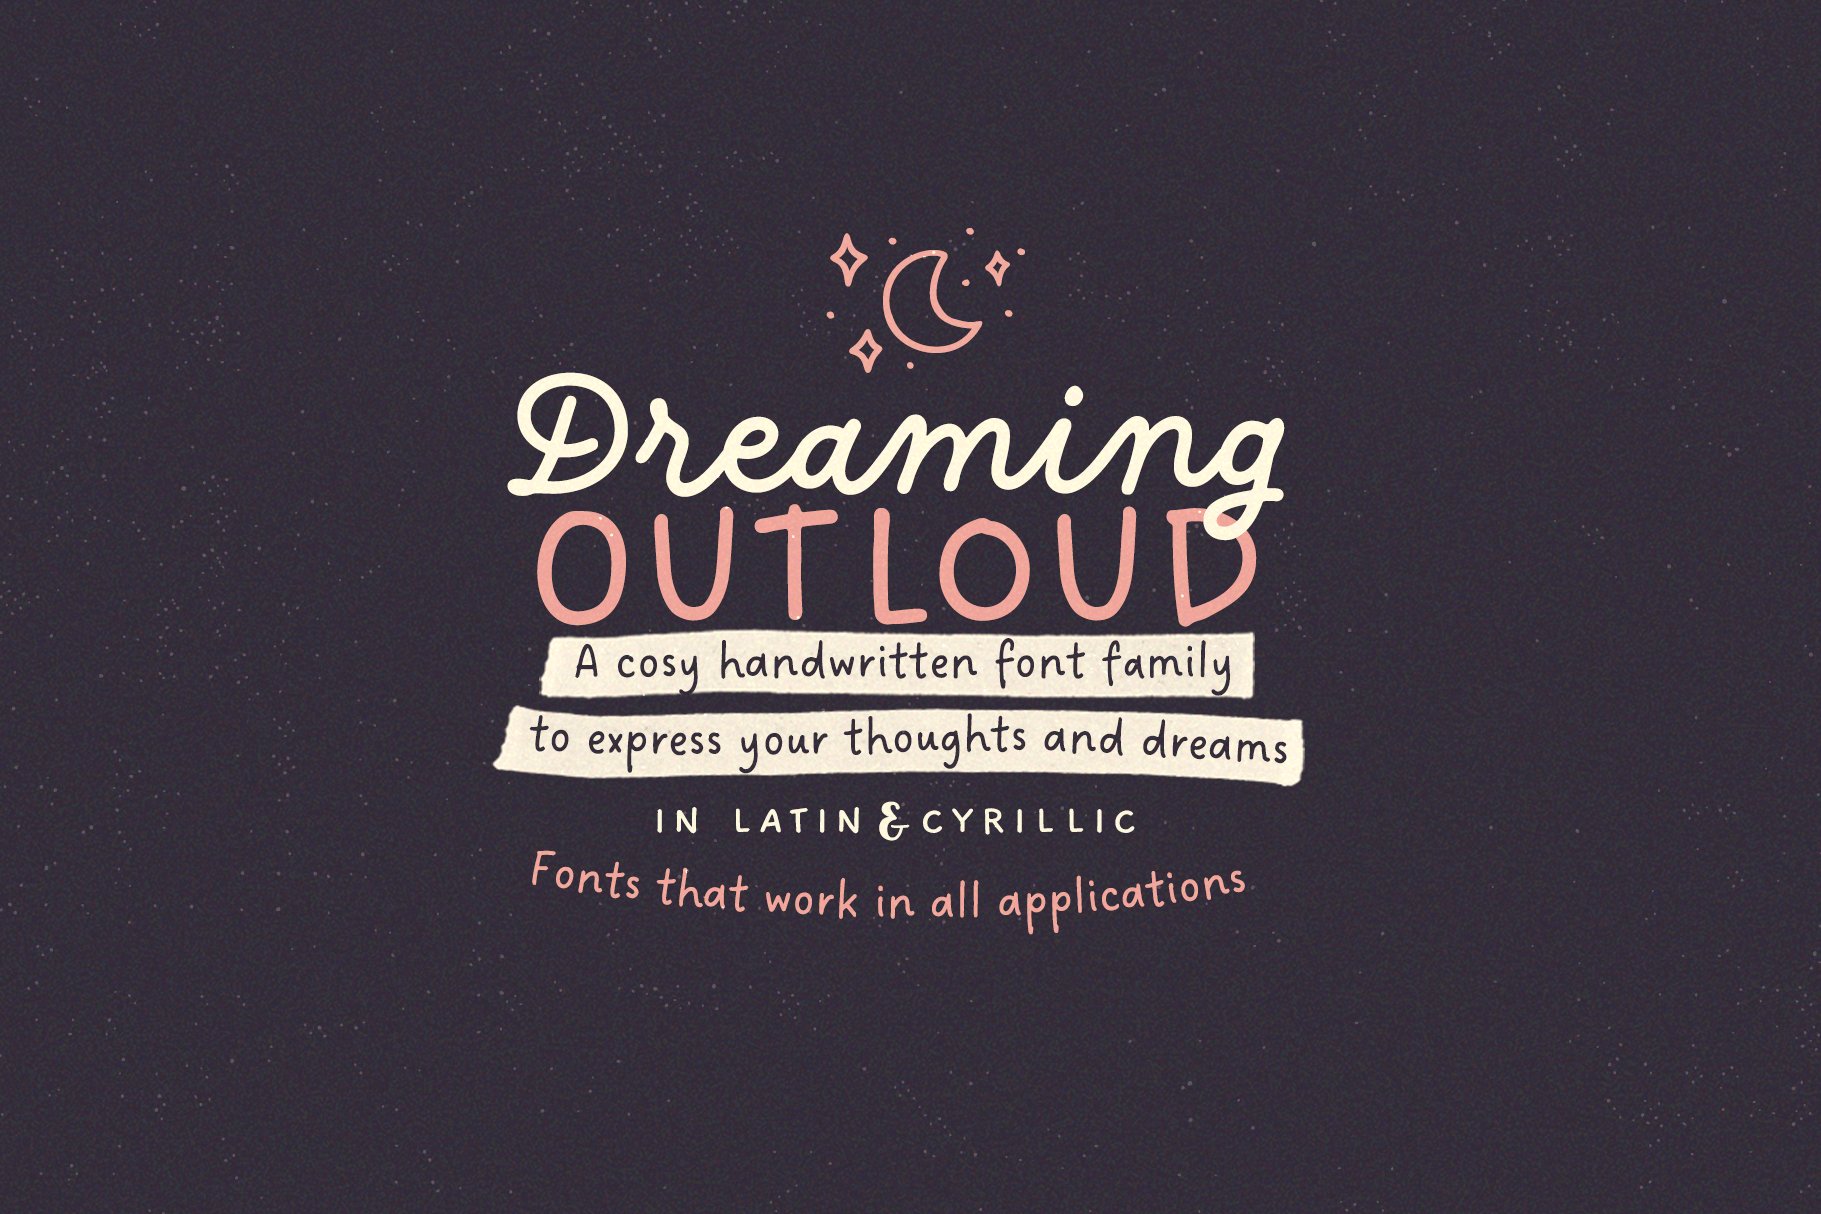 Dreaming Outloud Font Pack cover image.